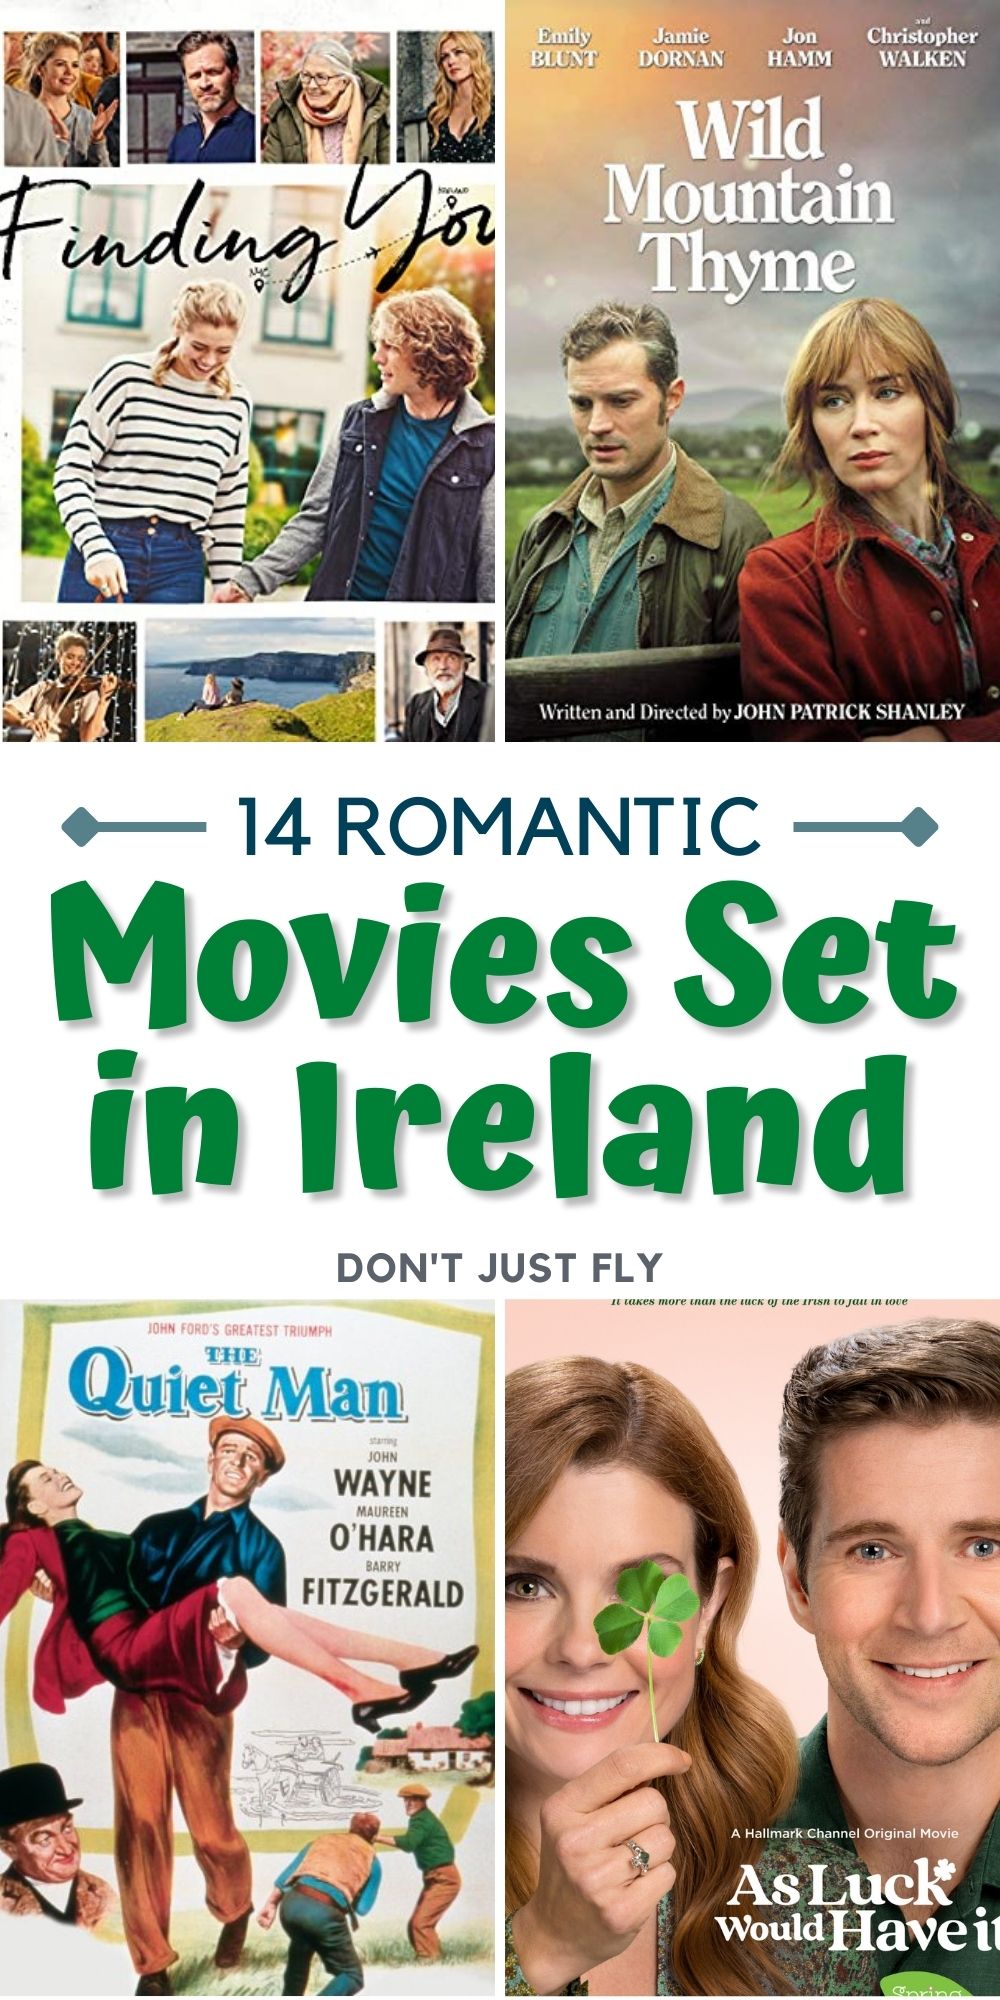 A photo collage shows several movie posters for movies set in Ireland.